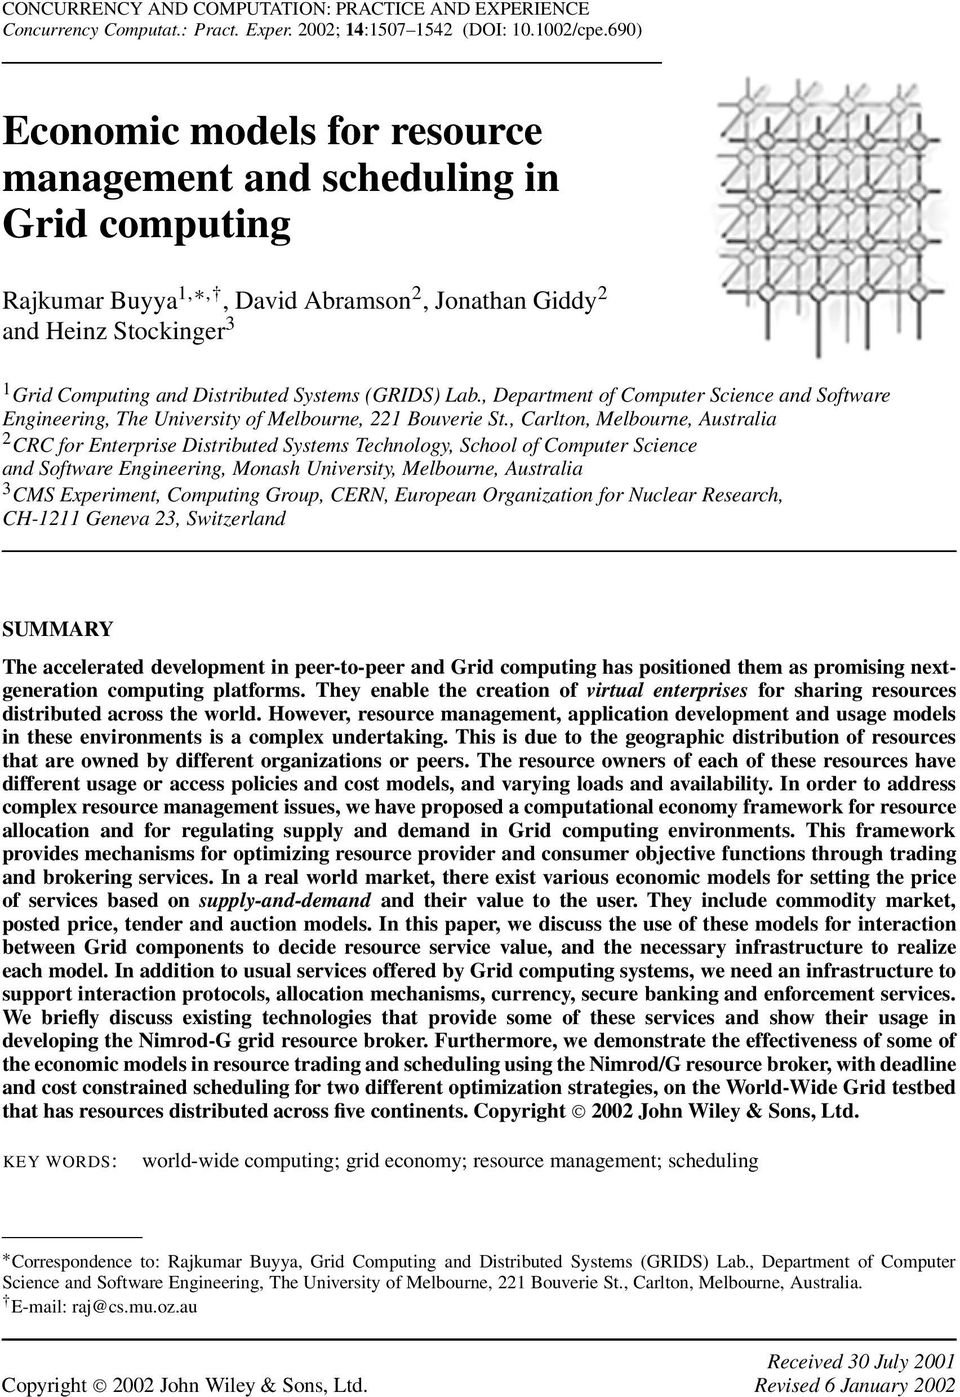 (GRIDS) Lab., Department of Computer Science and Software Engineering, The University of Melbourne, 221 Bouverie St.